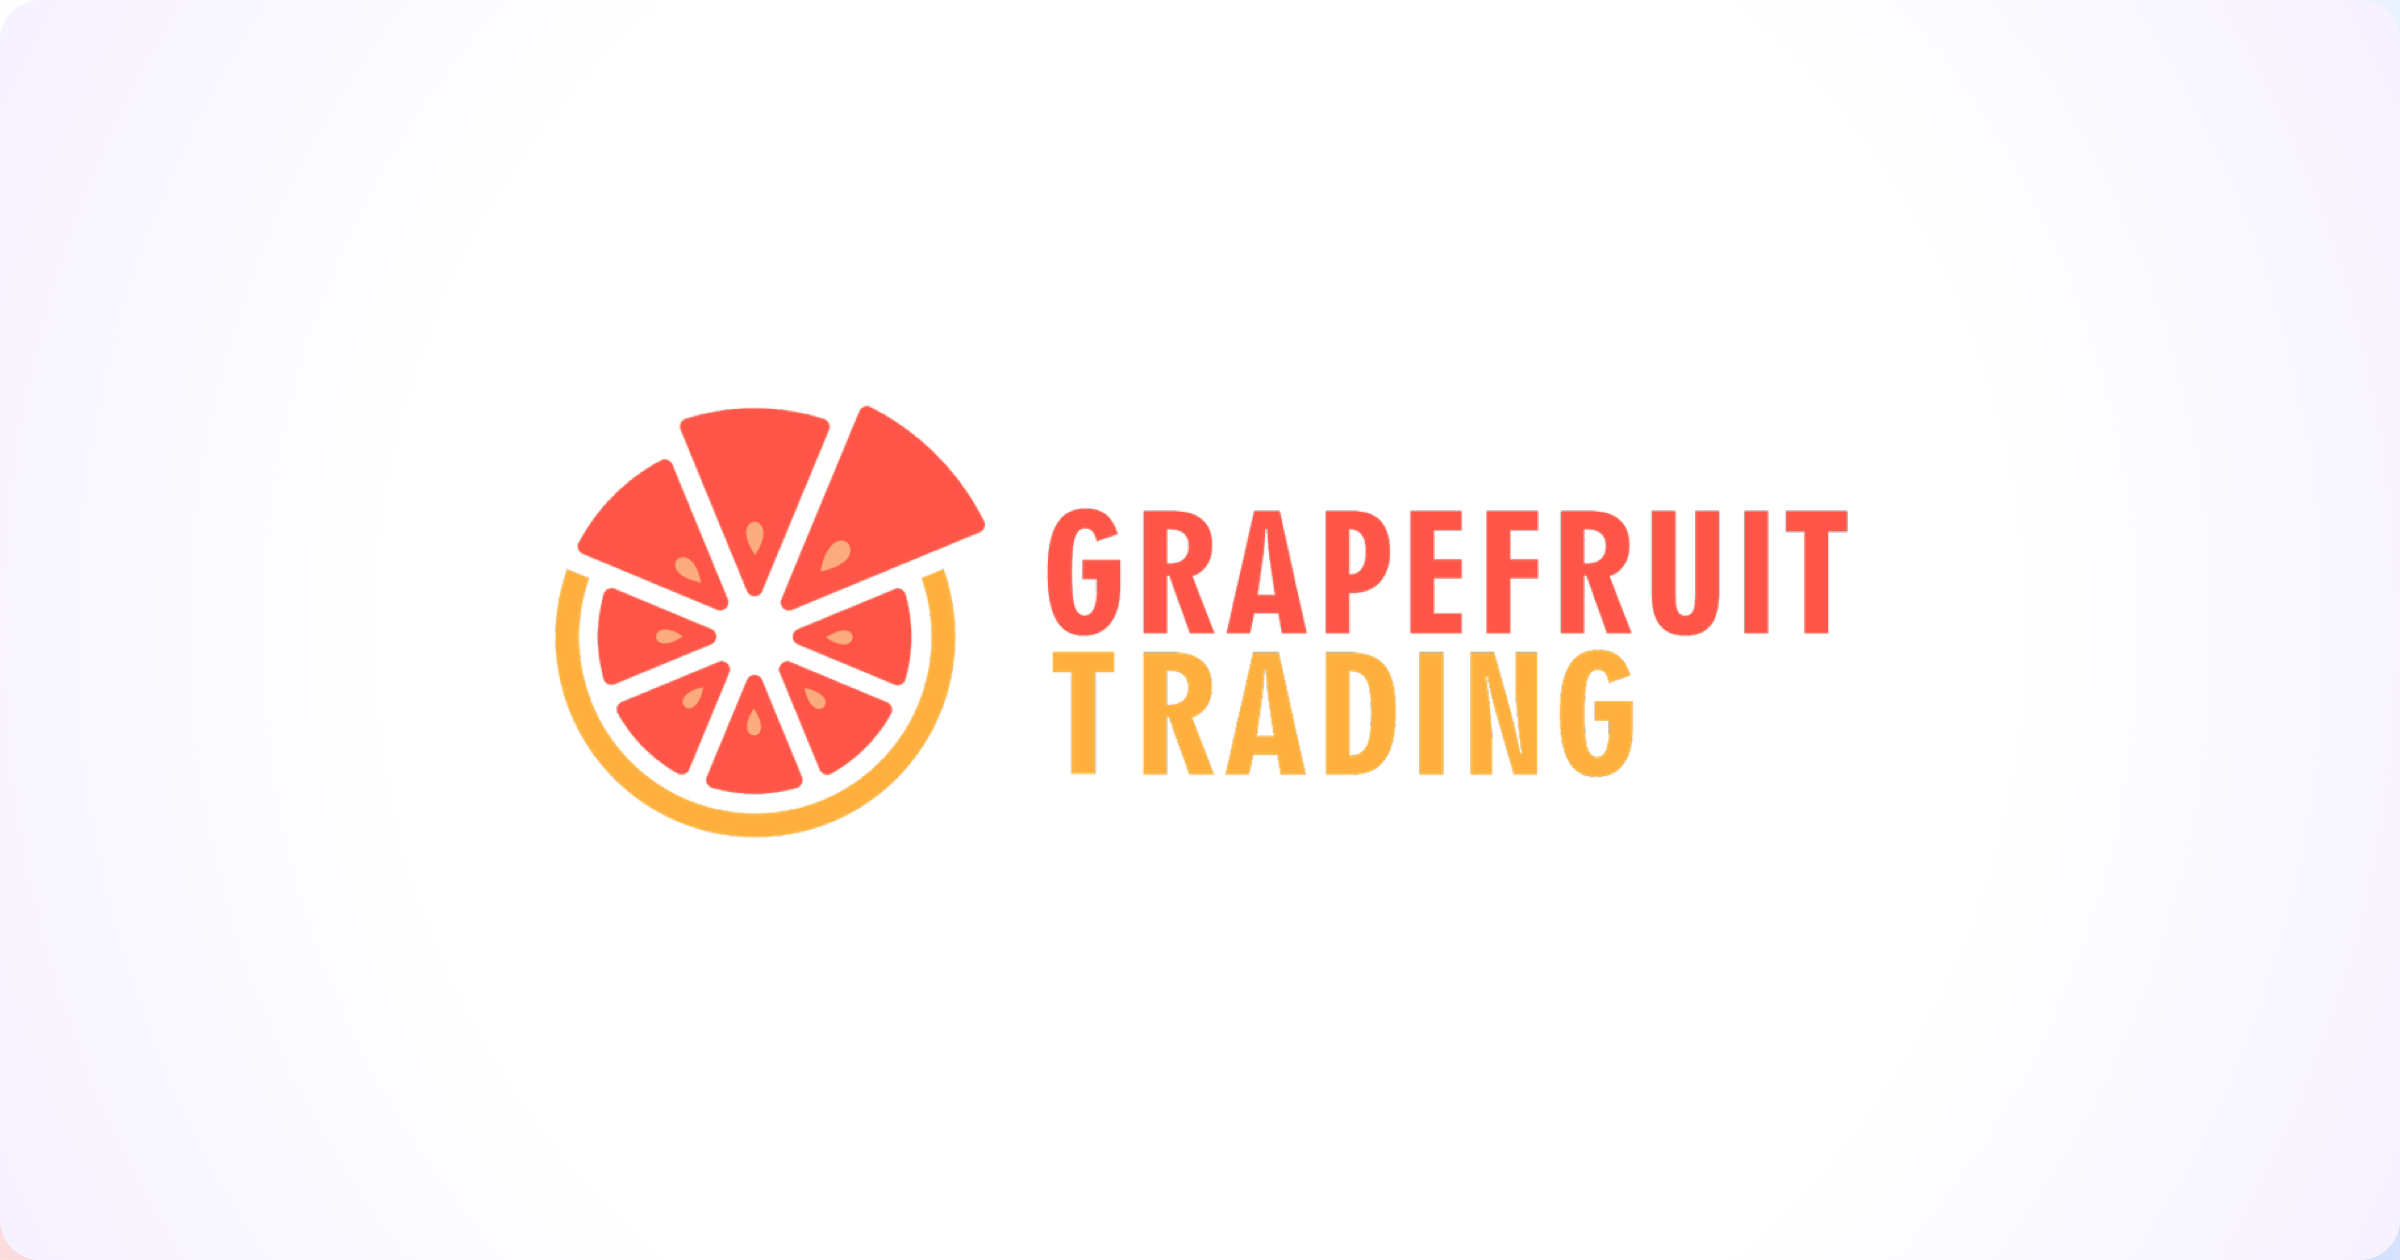 Grapefruit Trading uses USDC in advanced trading strategies